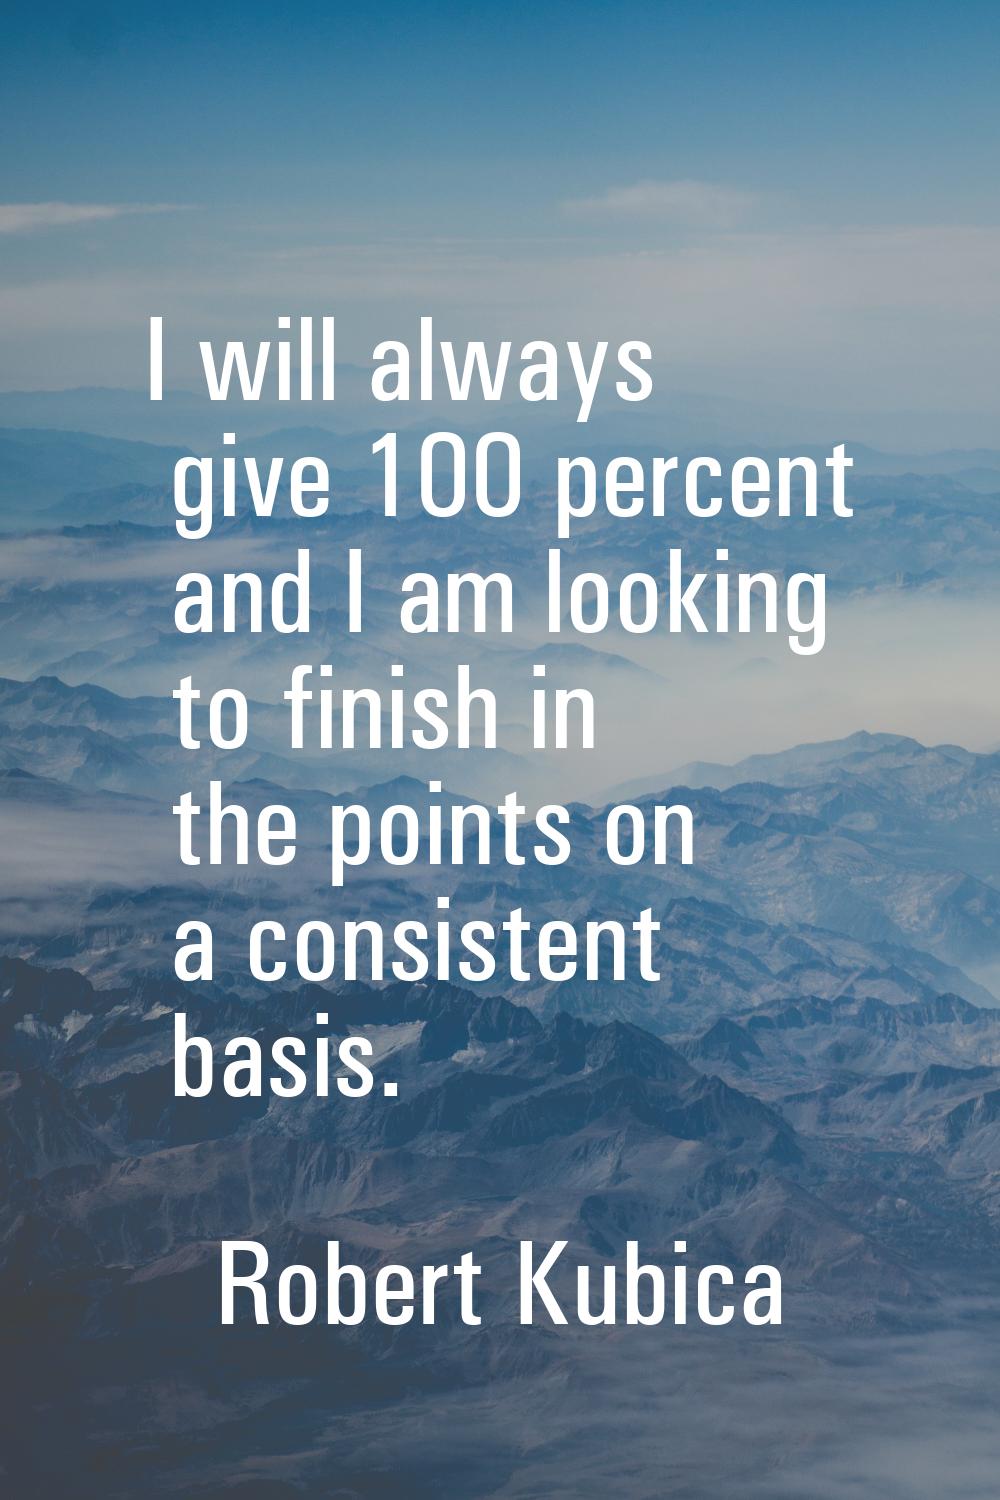 I will always give 100 percent and I am looking to finish in the points on a consistent basis.